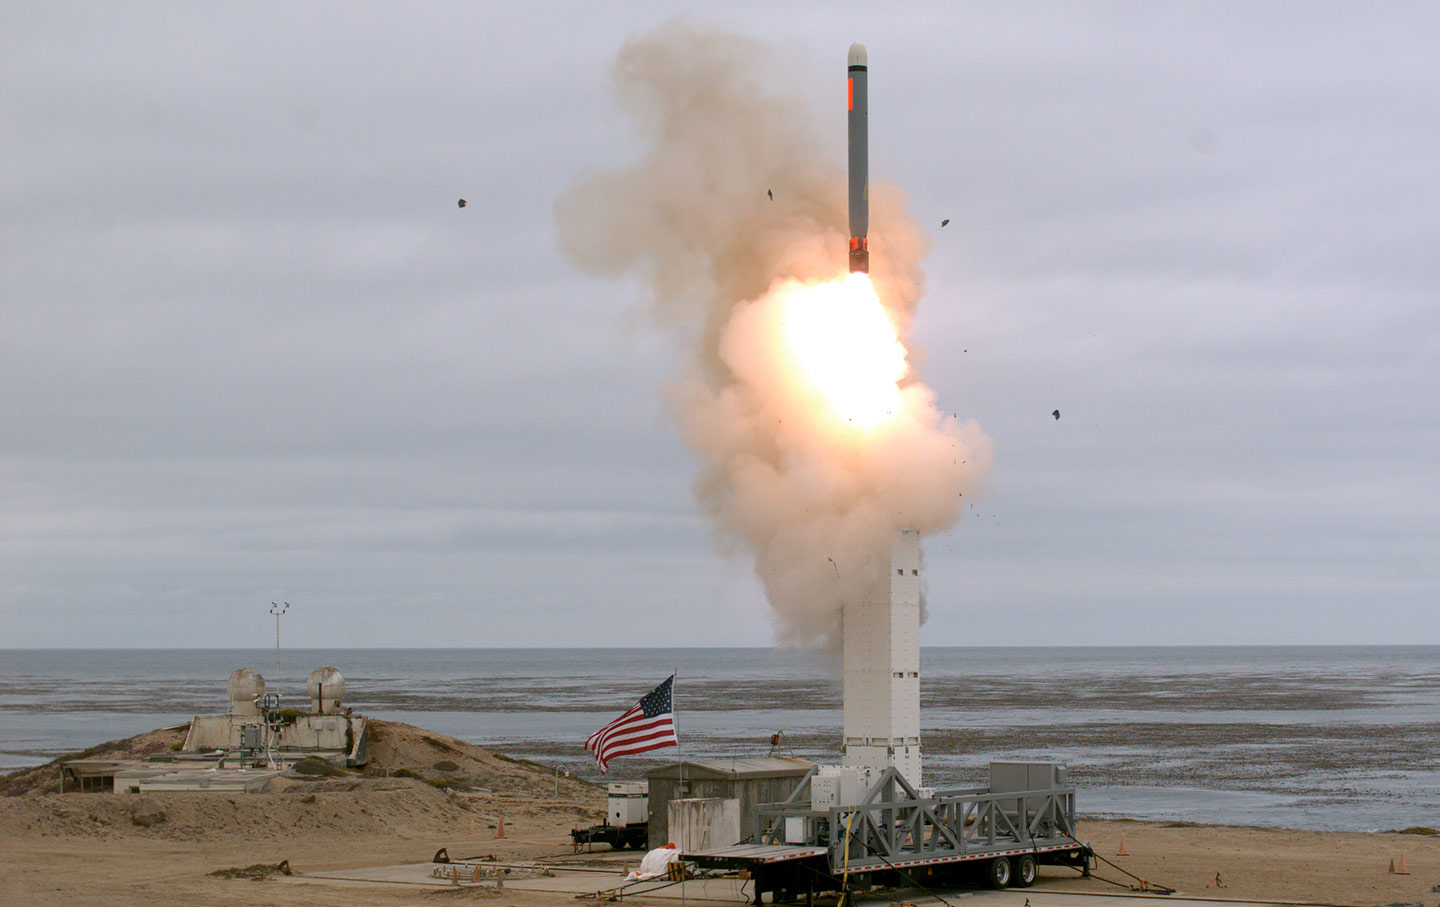 Department of Defense ground missile launch